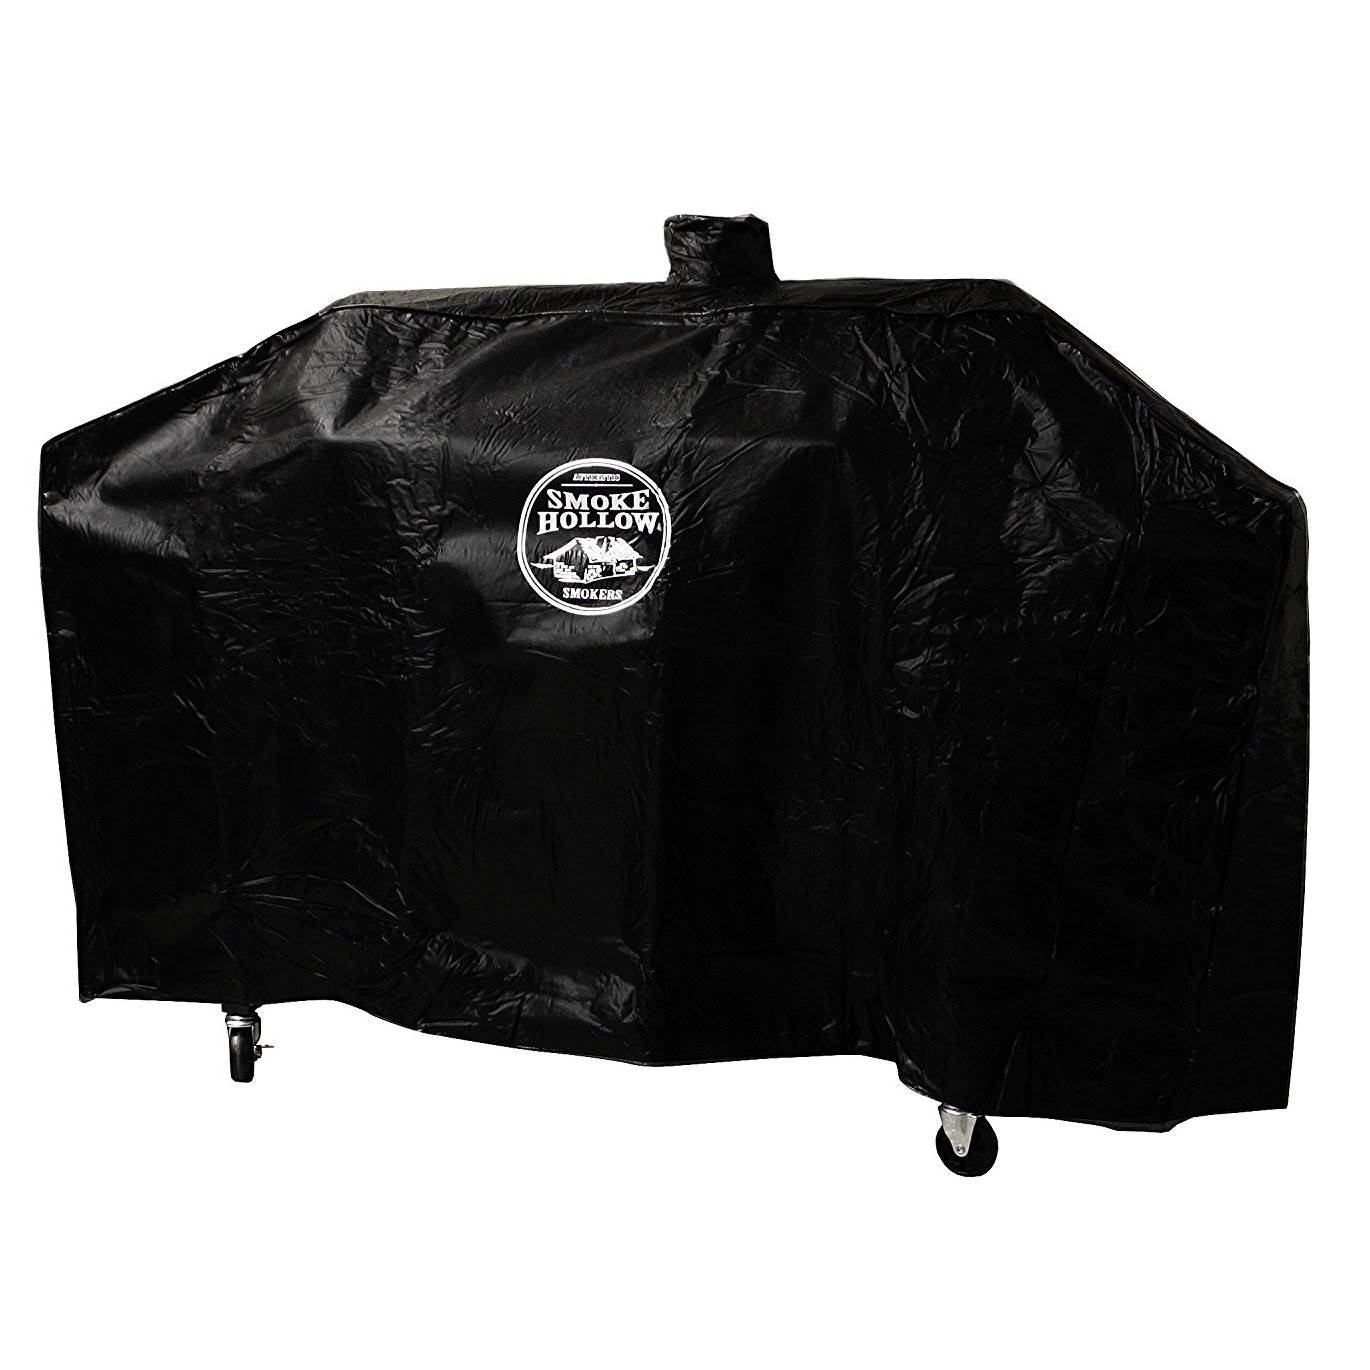 Smoke Hollow 65 Inch Polyester Weather Resistant Outdoor BBQ Grill Cover, Black 186505000223 eBay